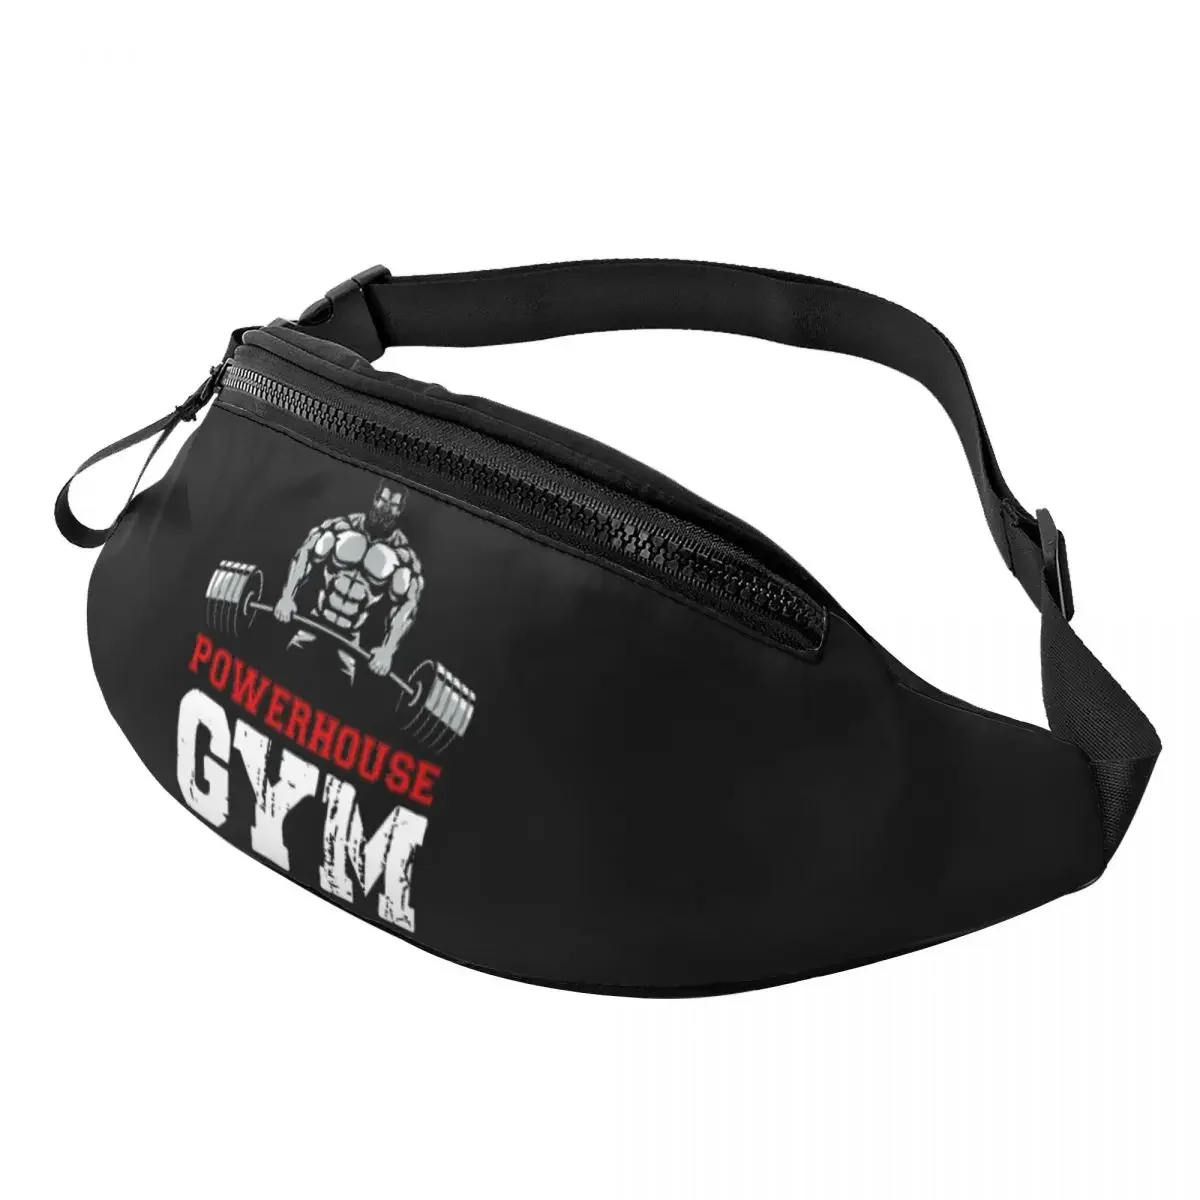 

Fitness Muscle Powerhouse Gym Fanny Pack for Men Women Fashion Bodybuilding Gym Crossbody Waist Bag Traveling Phone Money Pouch